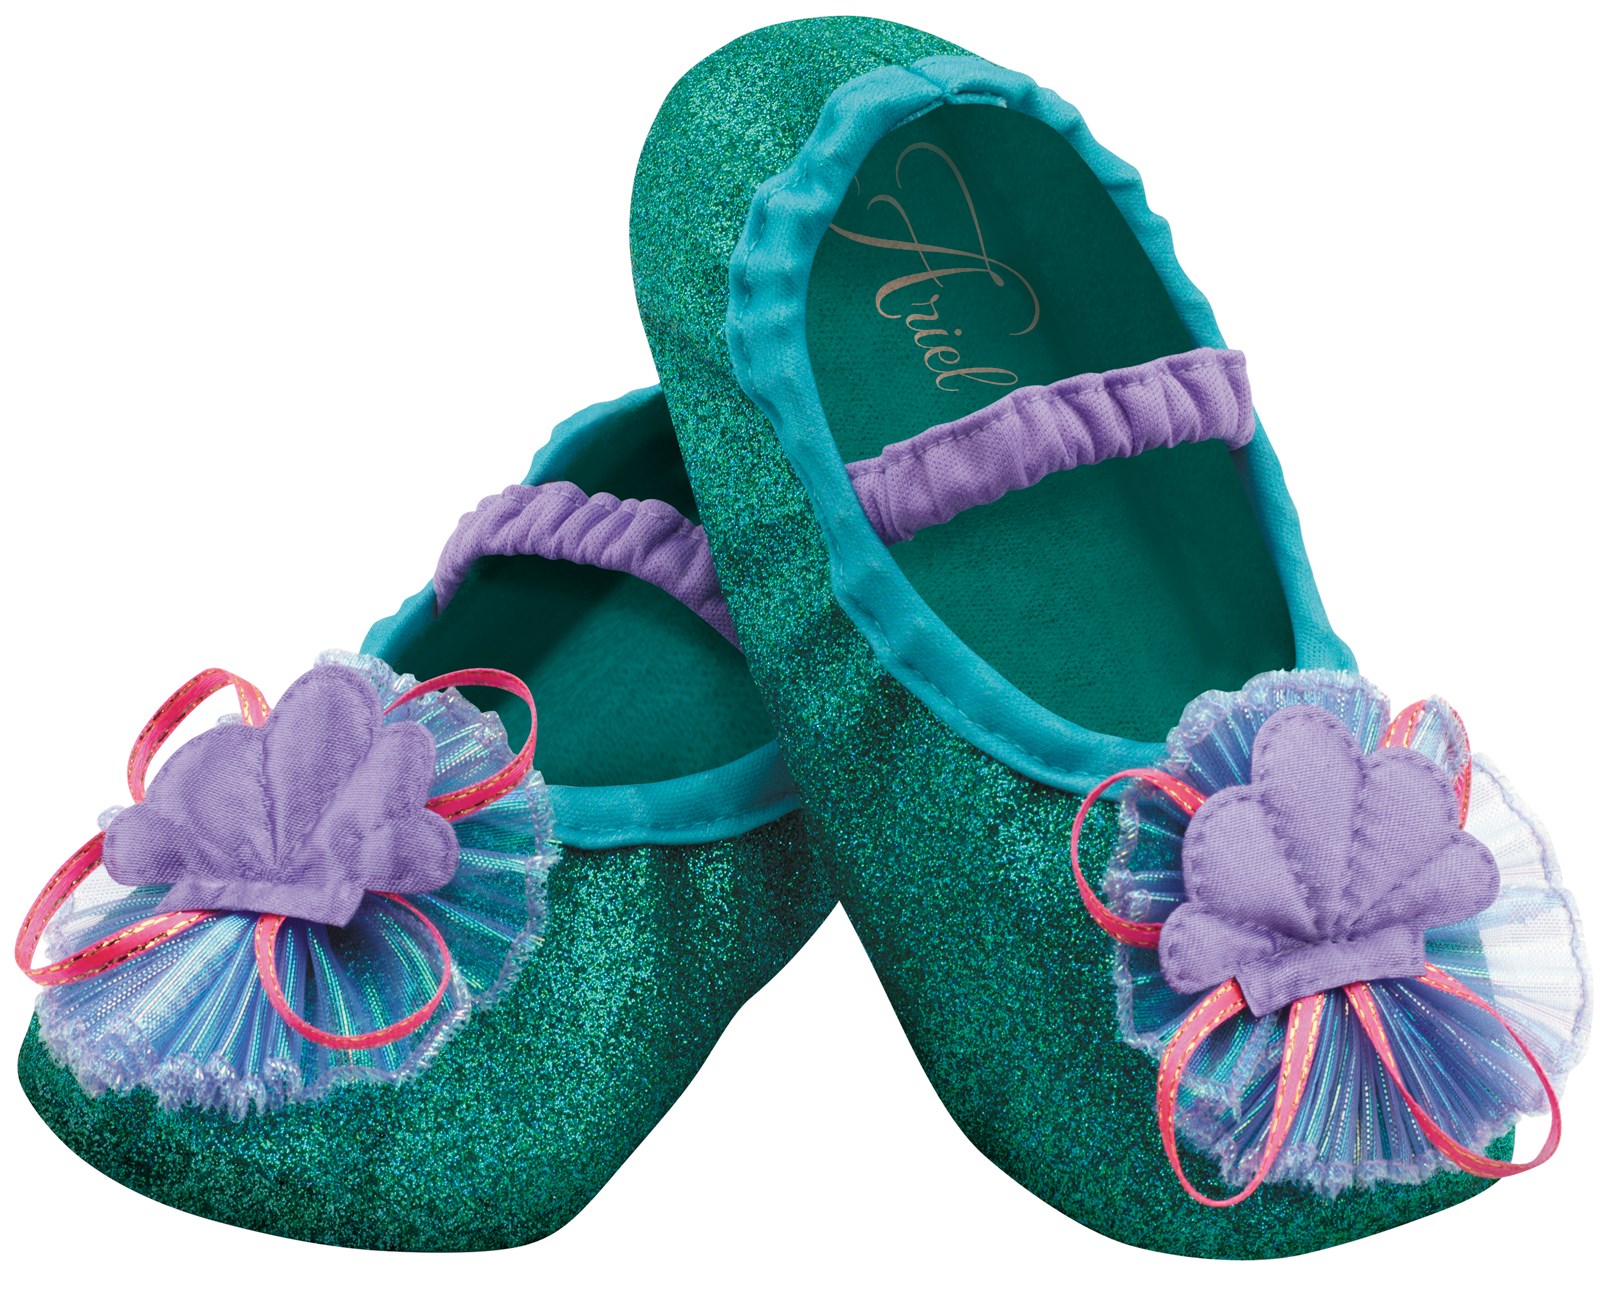 Disney Princess Ariel Slippers For Toddlers